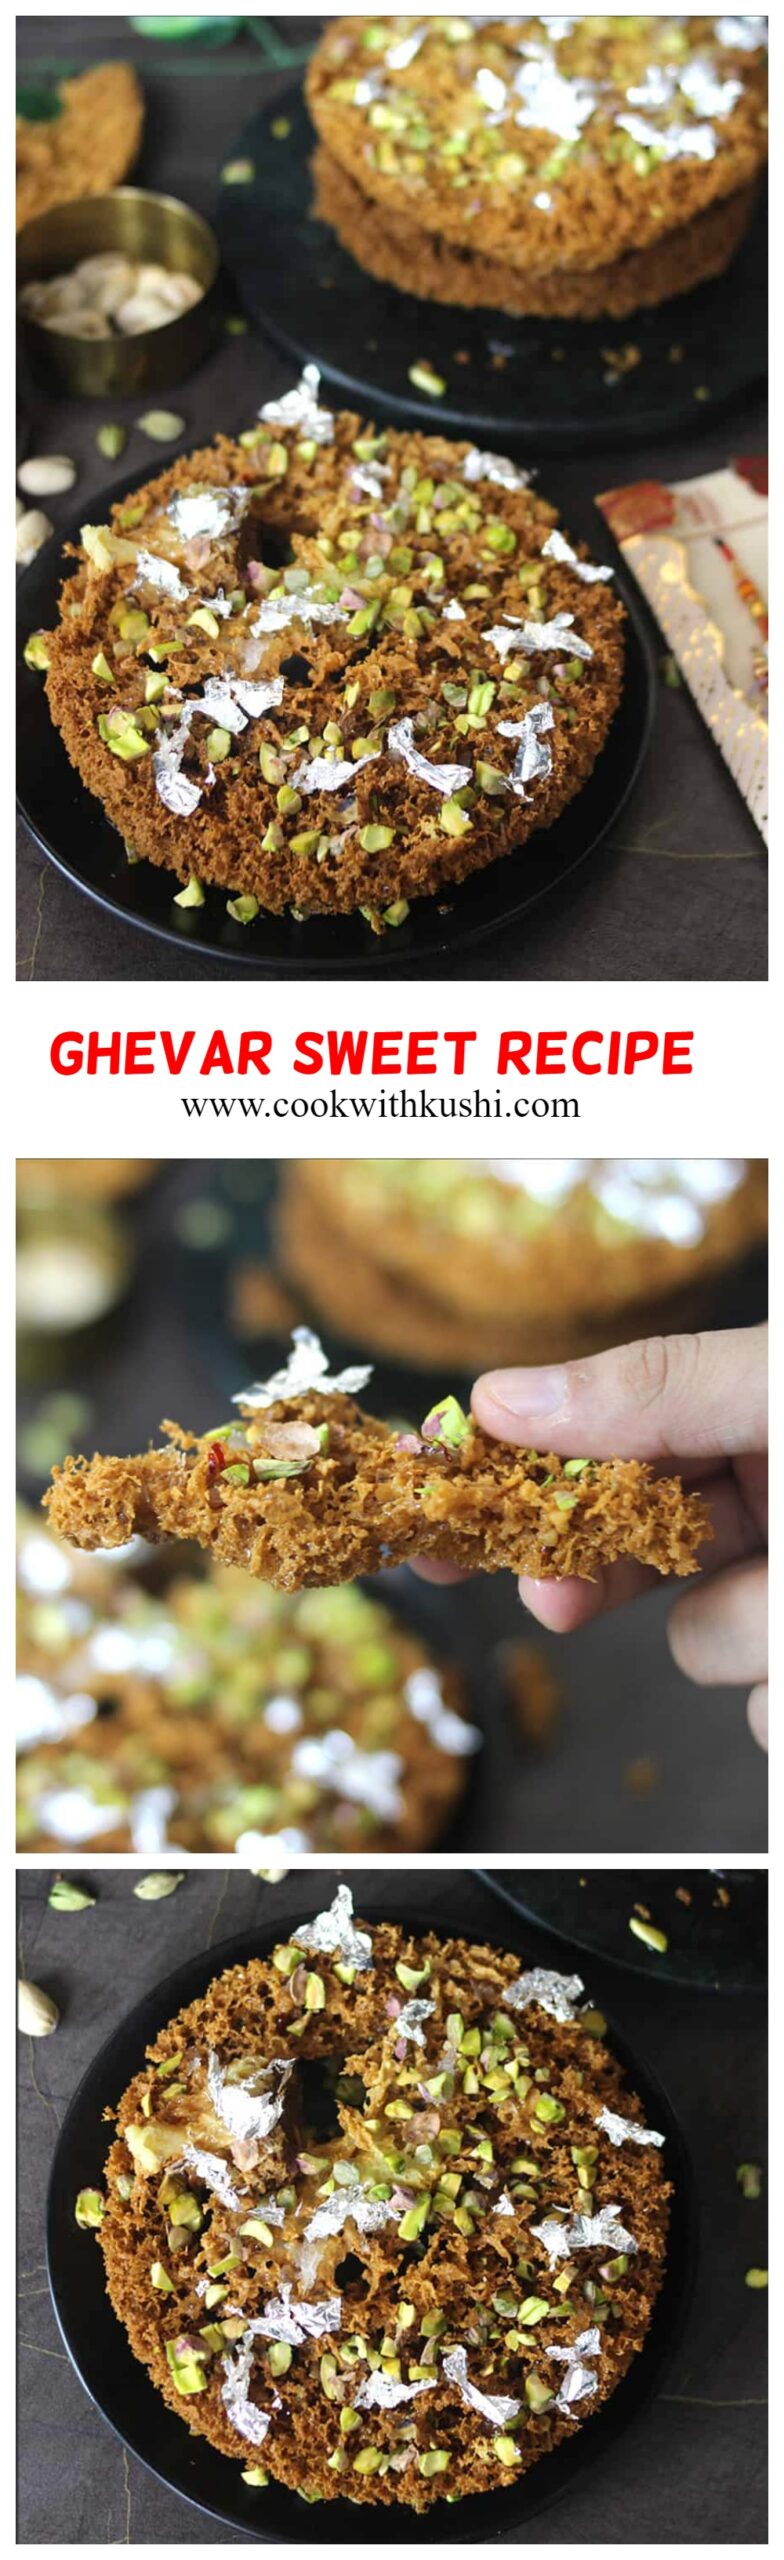 How to make traditional rajasthani ghevar sweet at home #ghevar #Indiansweet